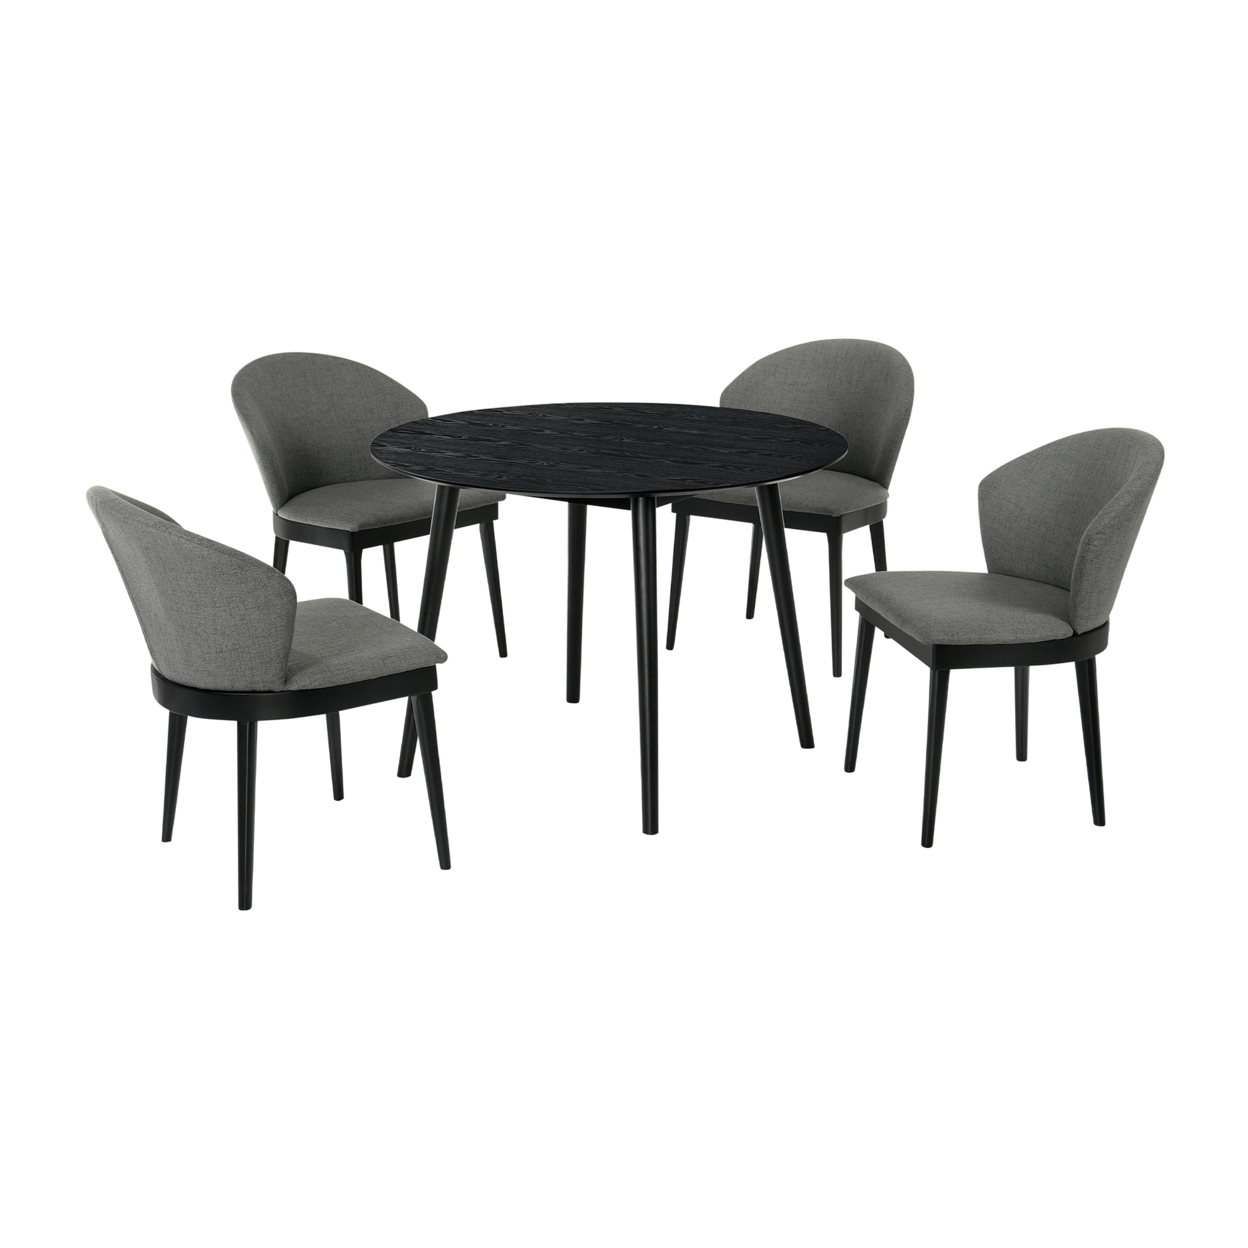 5 Piece Dining Set With Curved Fabric Side Chair, Black And Gray- Saltoro Sherpi